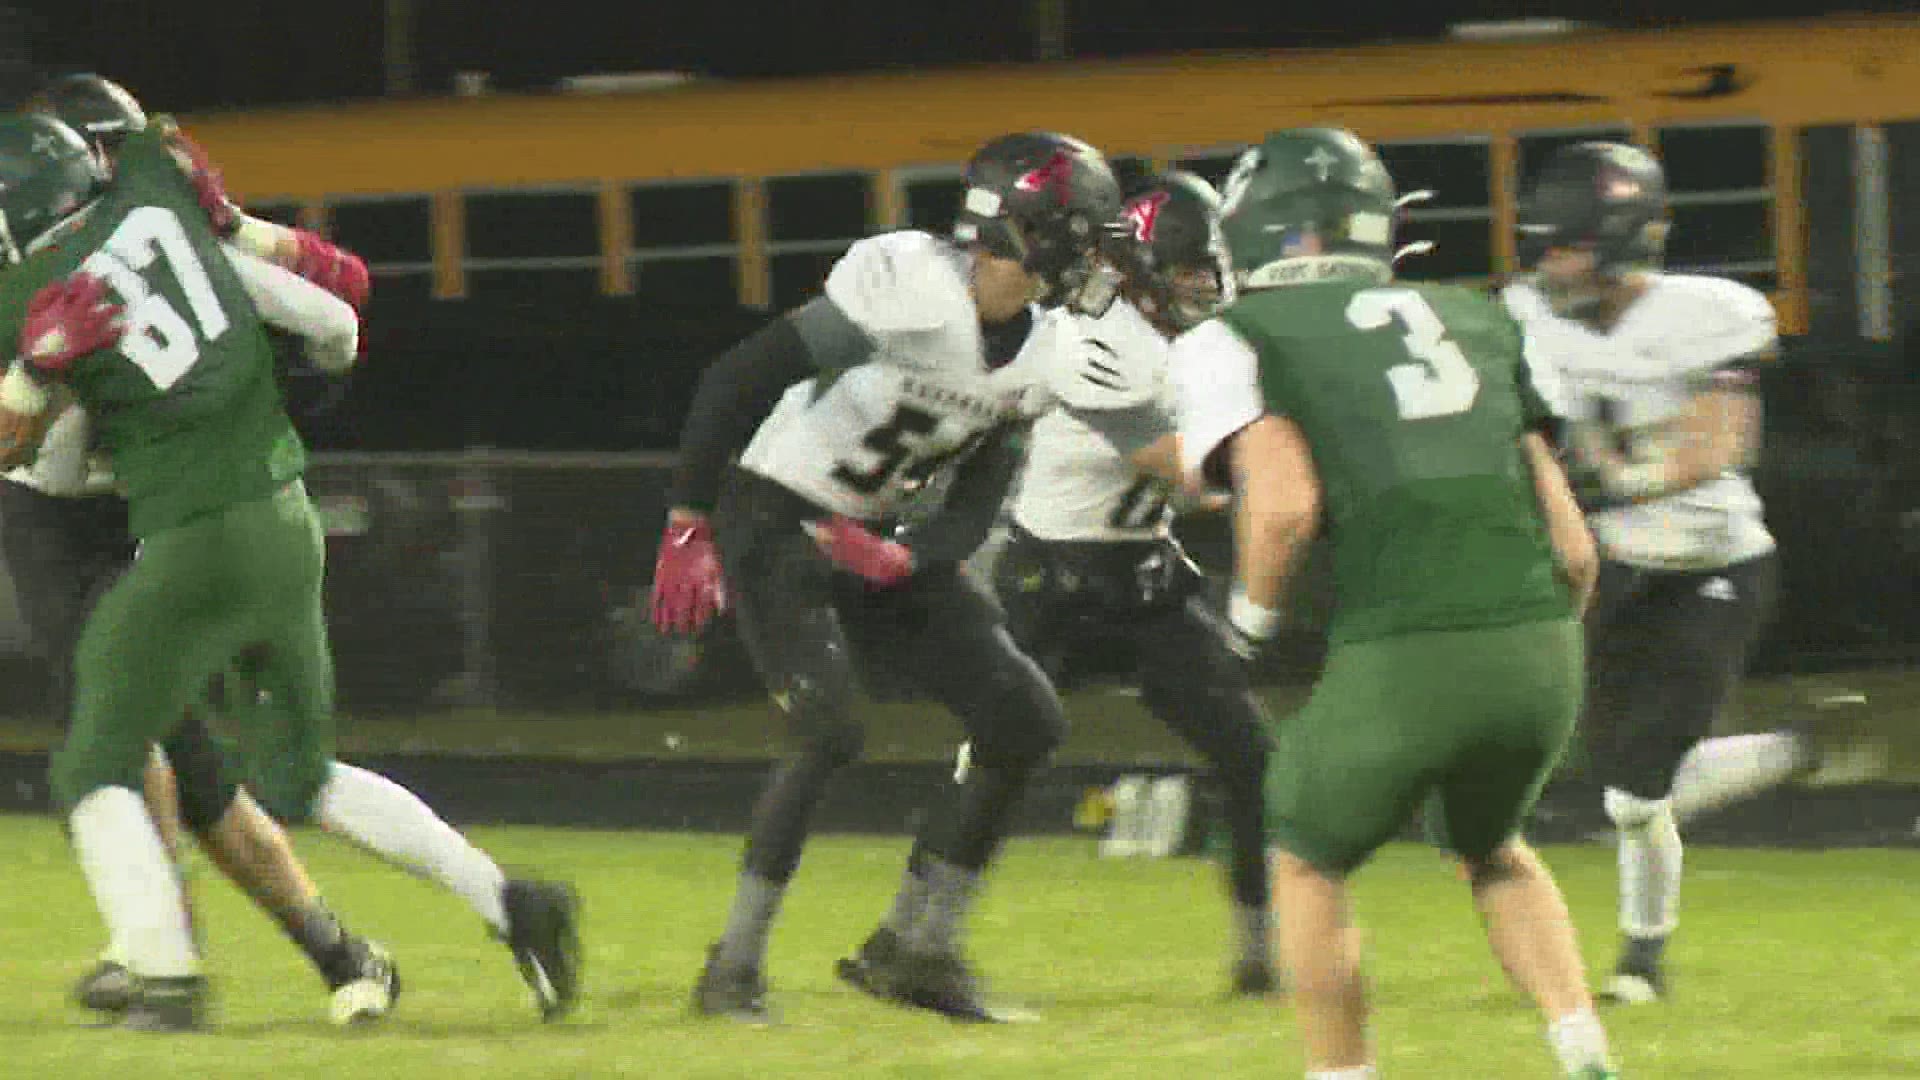 Watch highlights between Allendale and West Catholic.